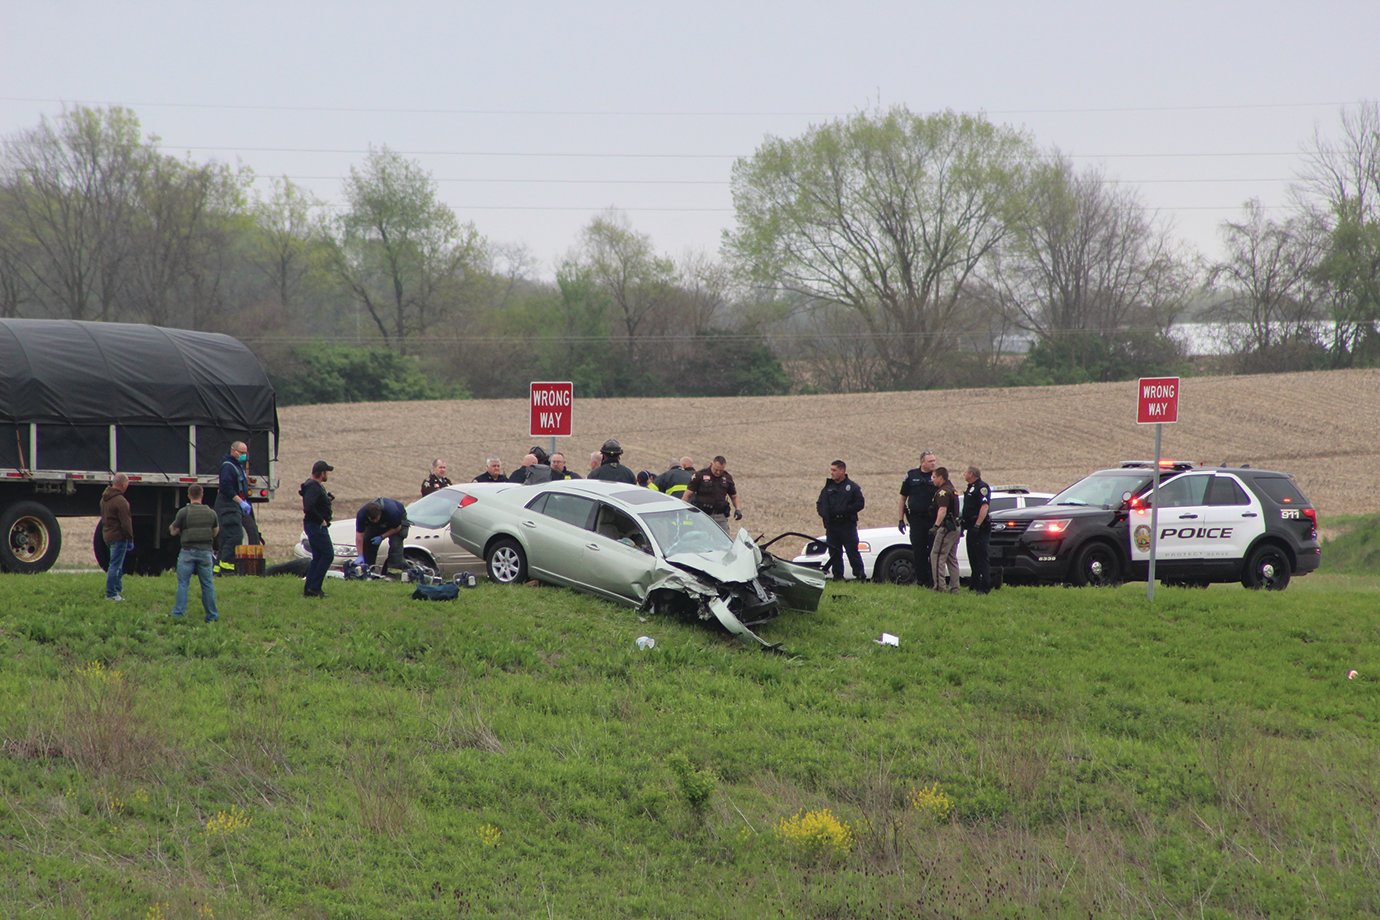 A high-speed pursuit that began in Noblesville ended Tuesday afternoon when the suspect in question collided with a vehicle and semi-trailer on the Interstate 74 exit ramp at State Road 32.